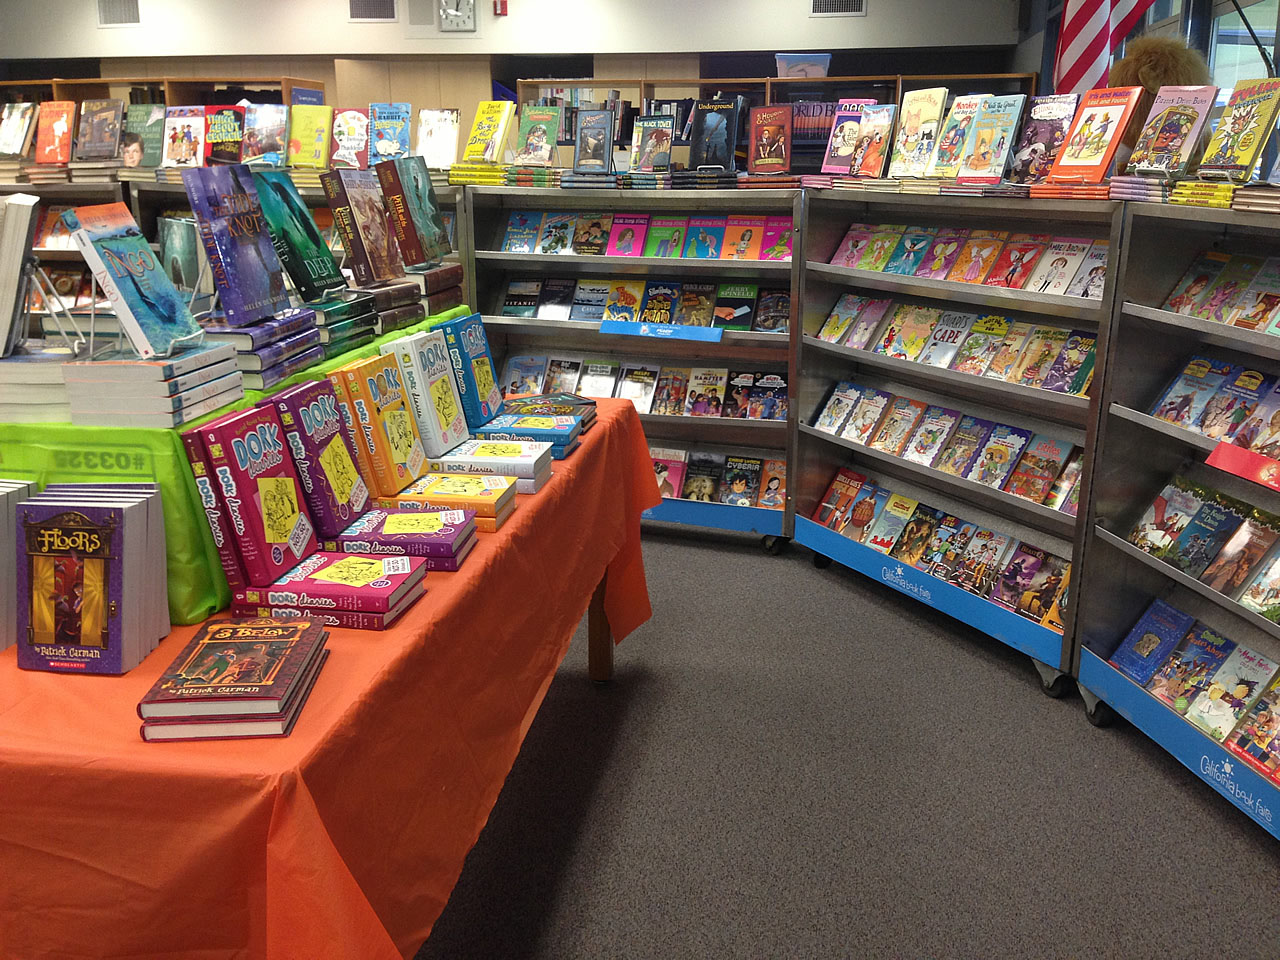 California Book Fairs Children's Reading Books for Kids of All Ages